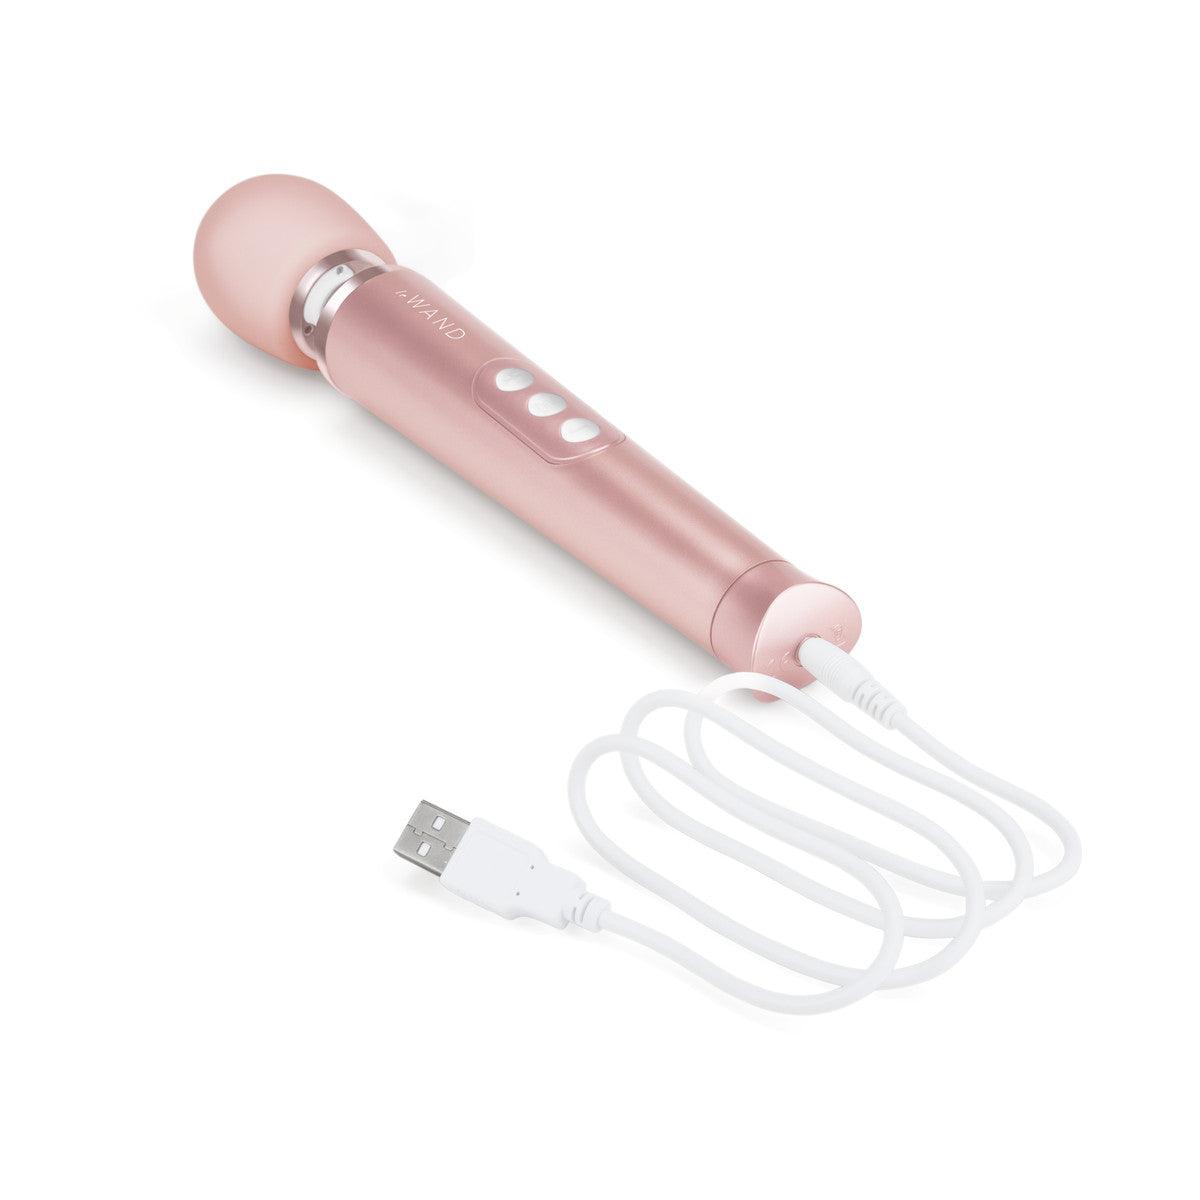 Wand Massager - My Temptations Sex Toys 